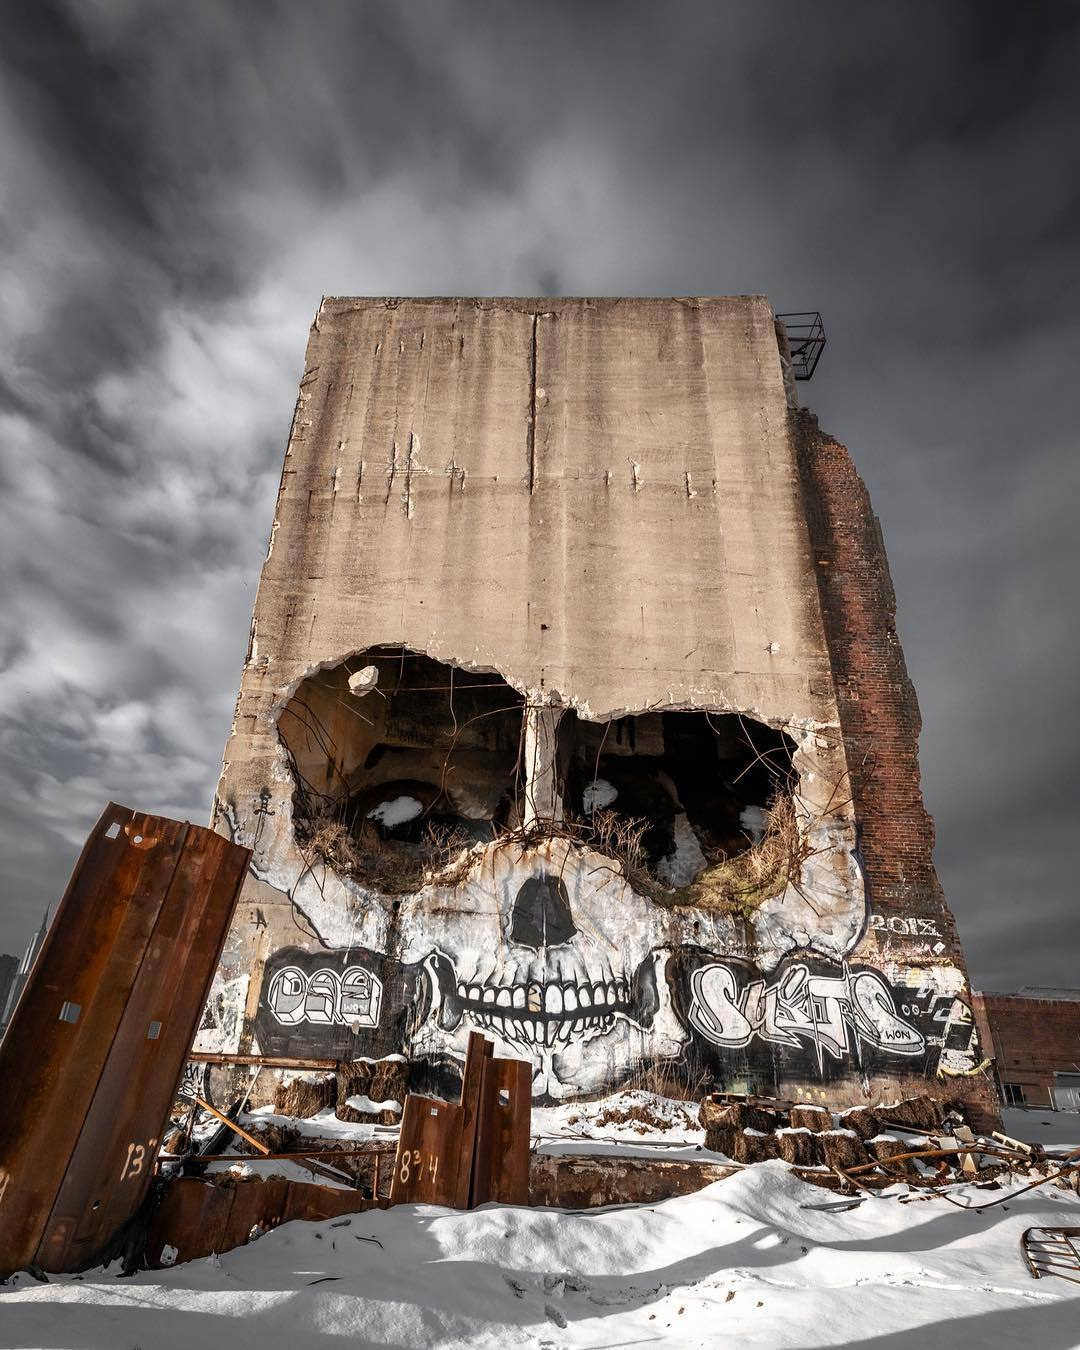 remarkable image of a crumbling wall with skull graffiti